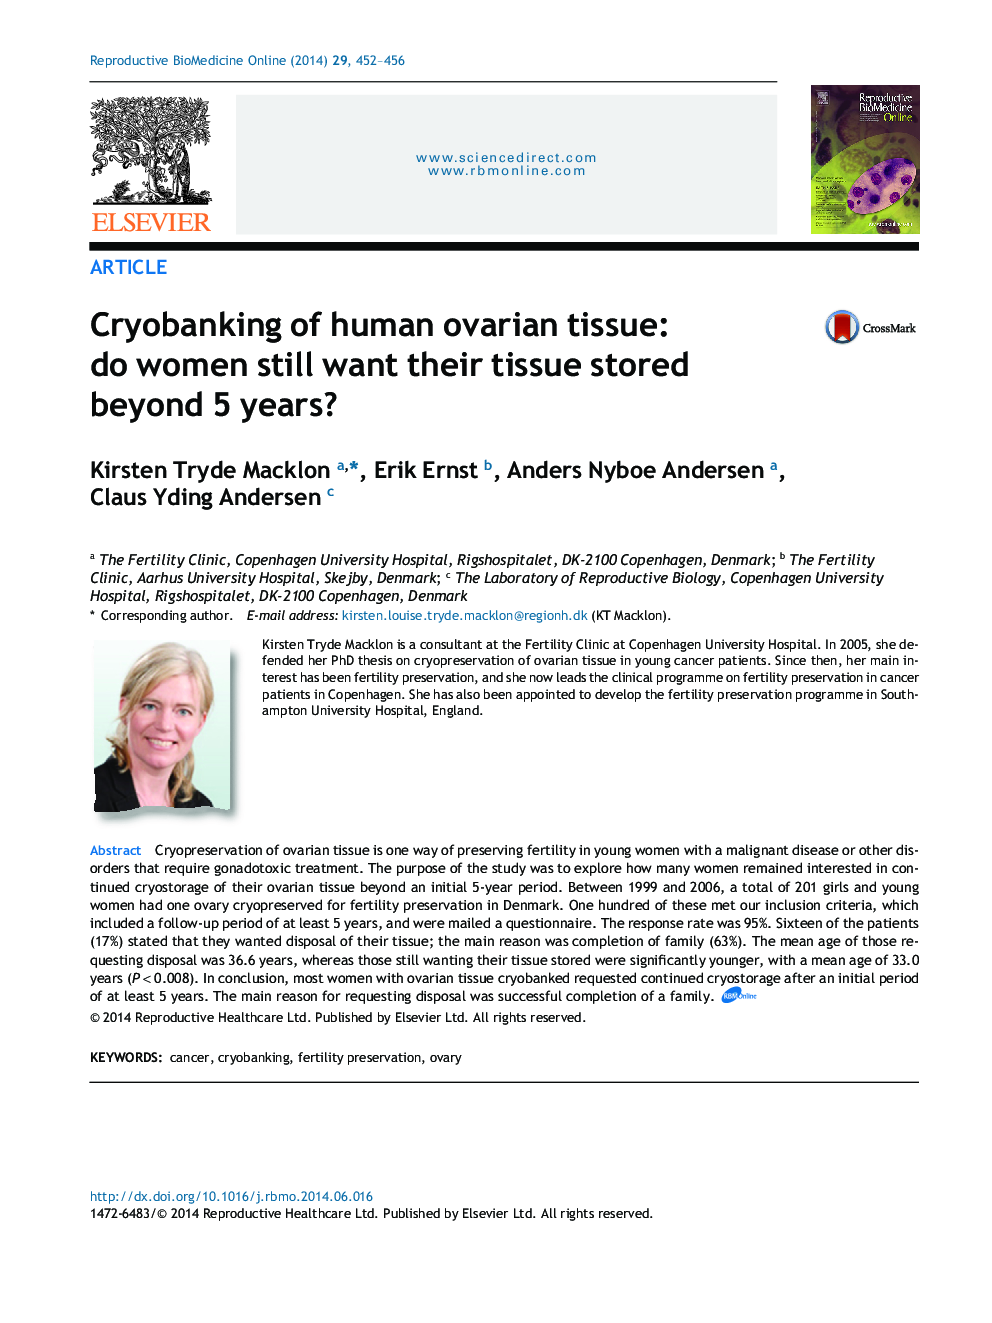 Cryobanking of human ovarian tissue: do women still want their tissue stored beyond 5 years?